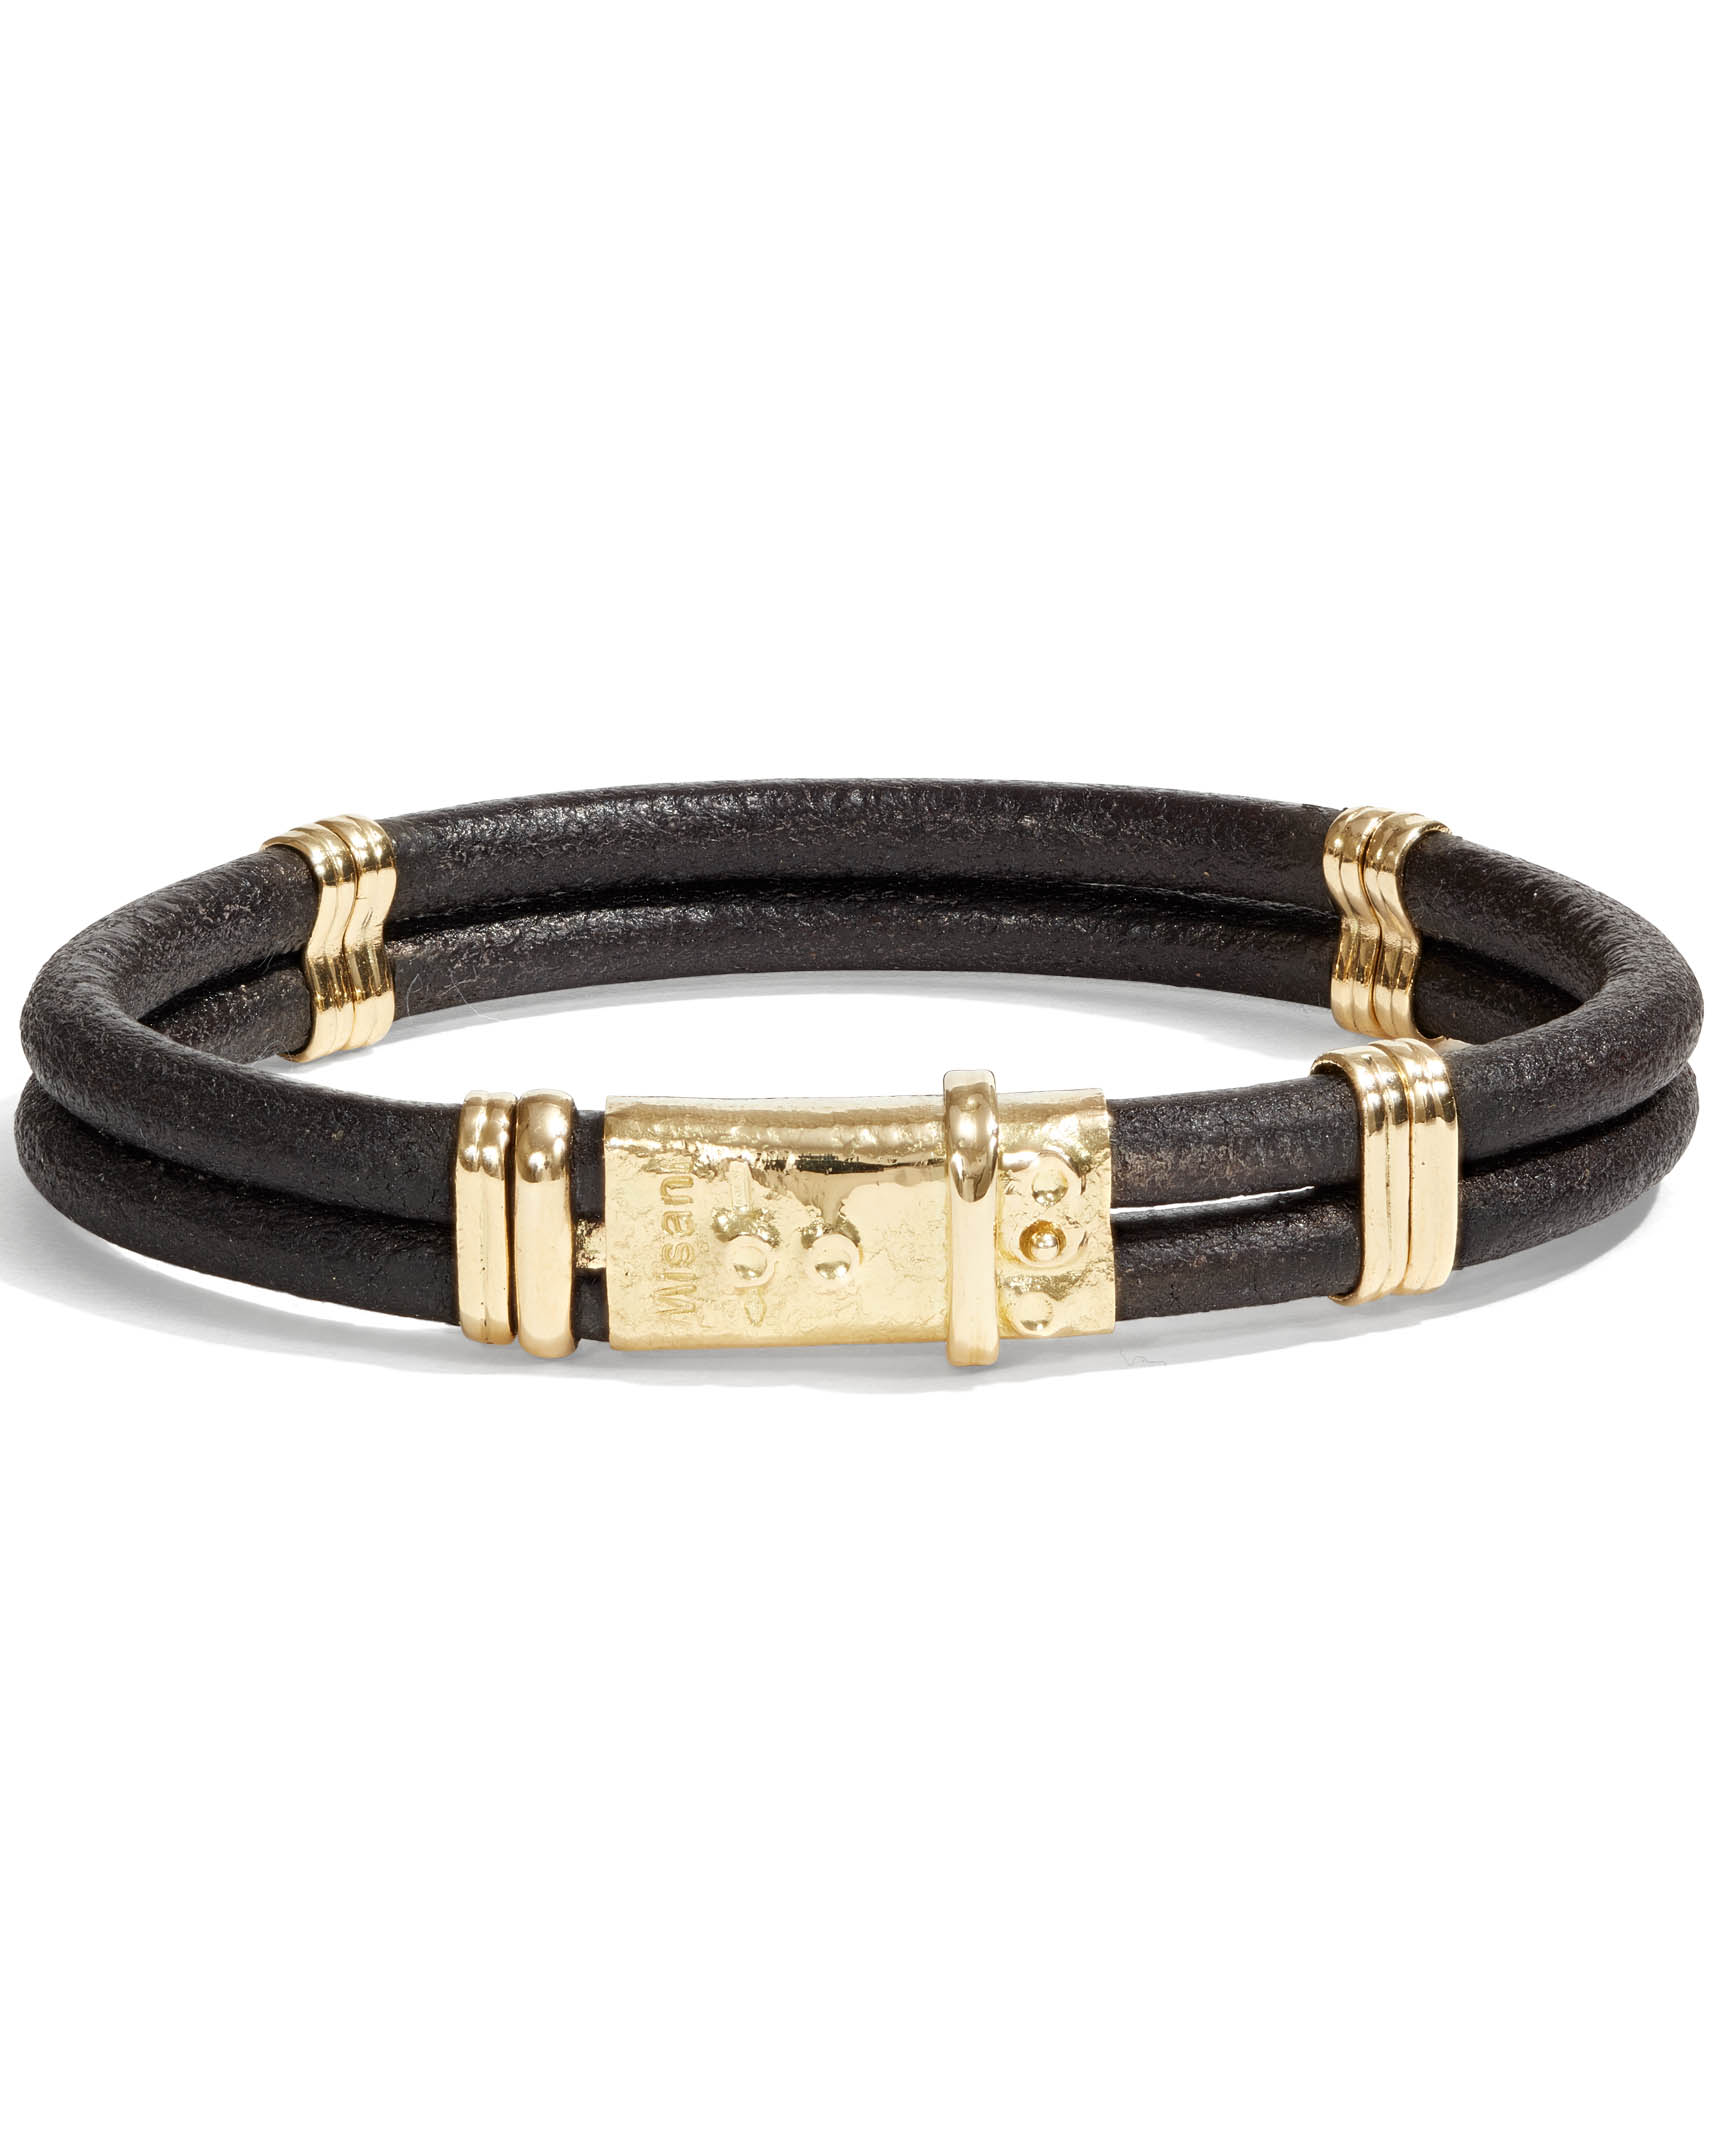 Double Band Round Leather and Yellow Gold Bracelet - Turgeon Raine